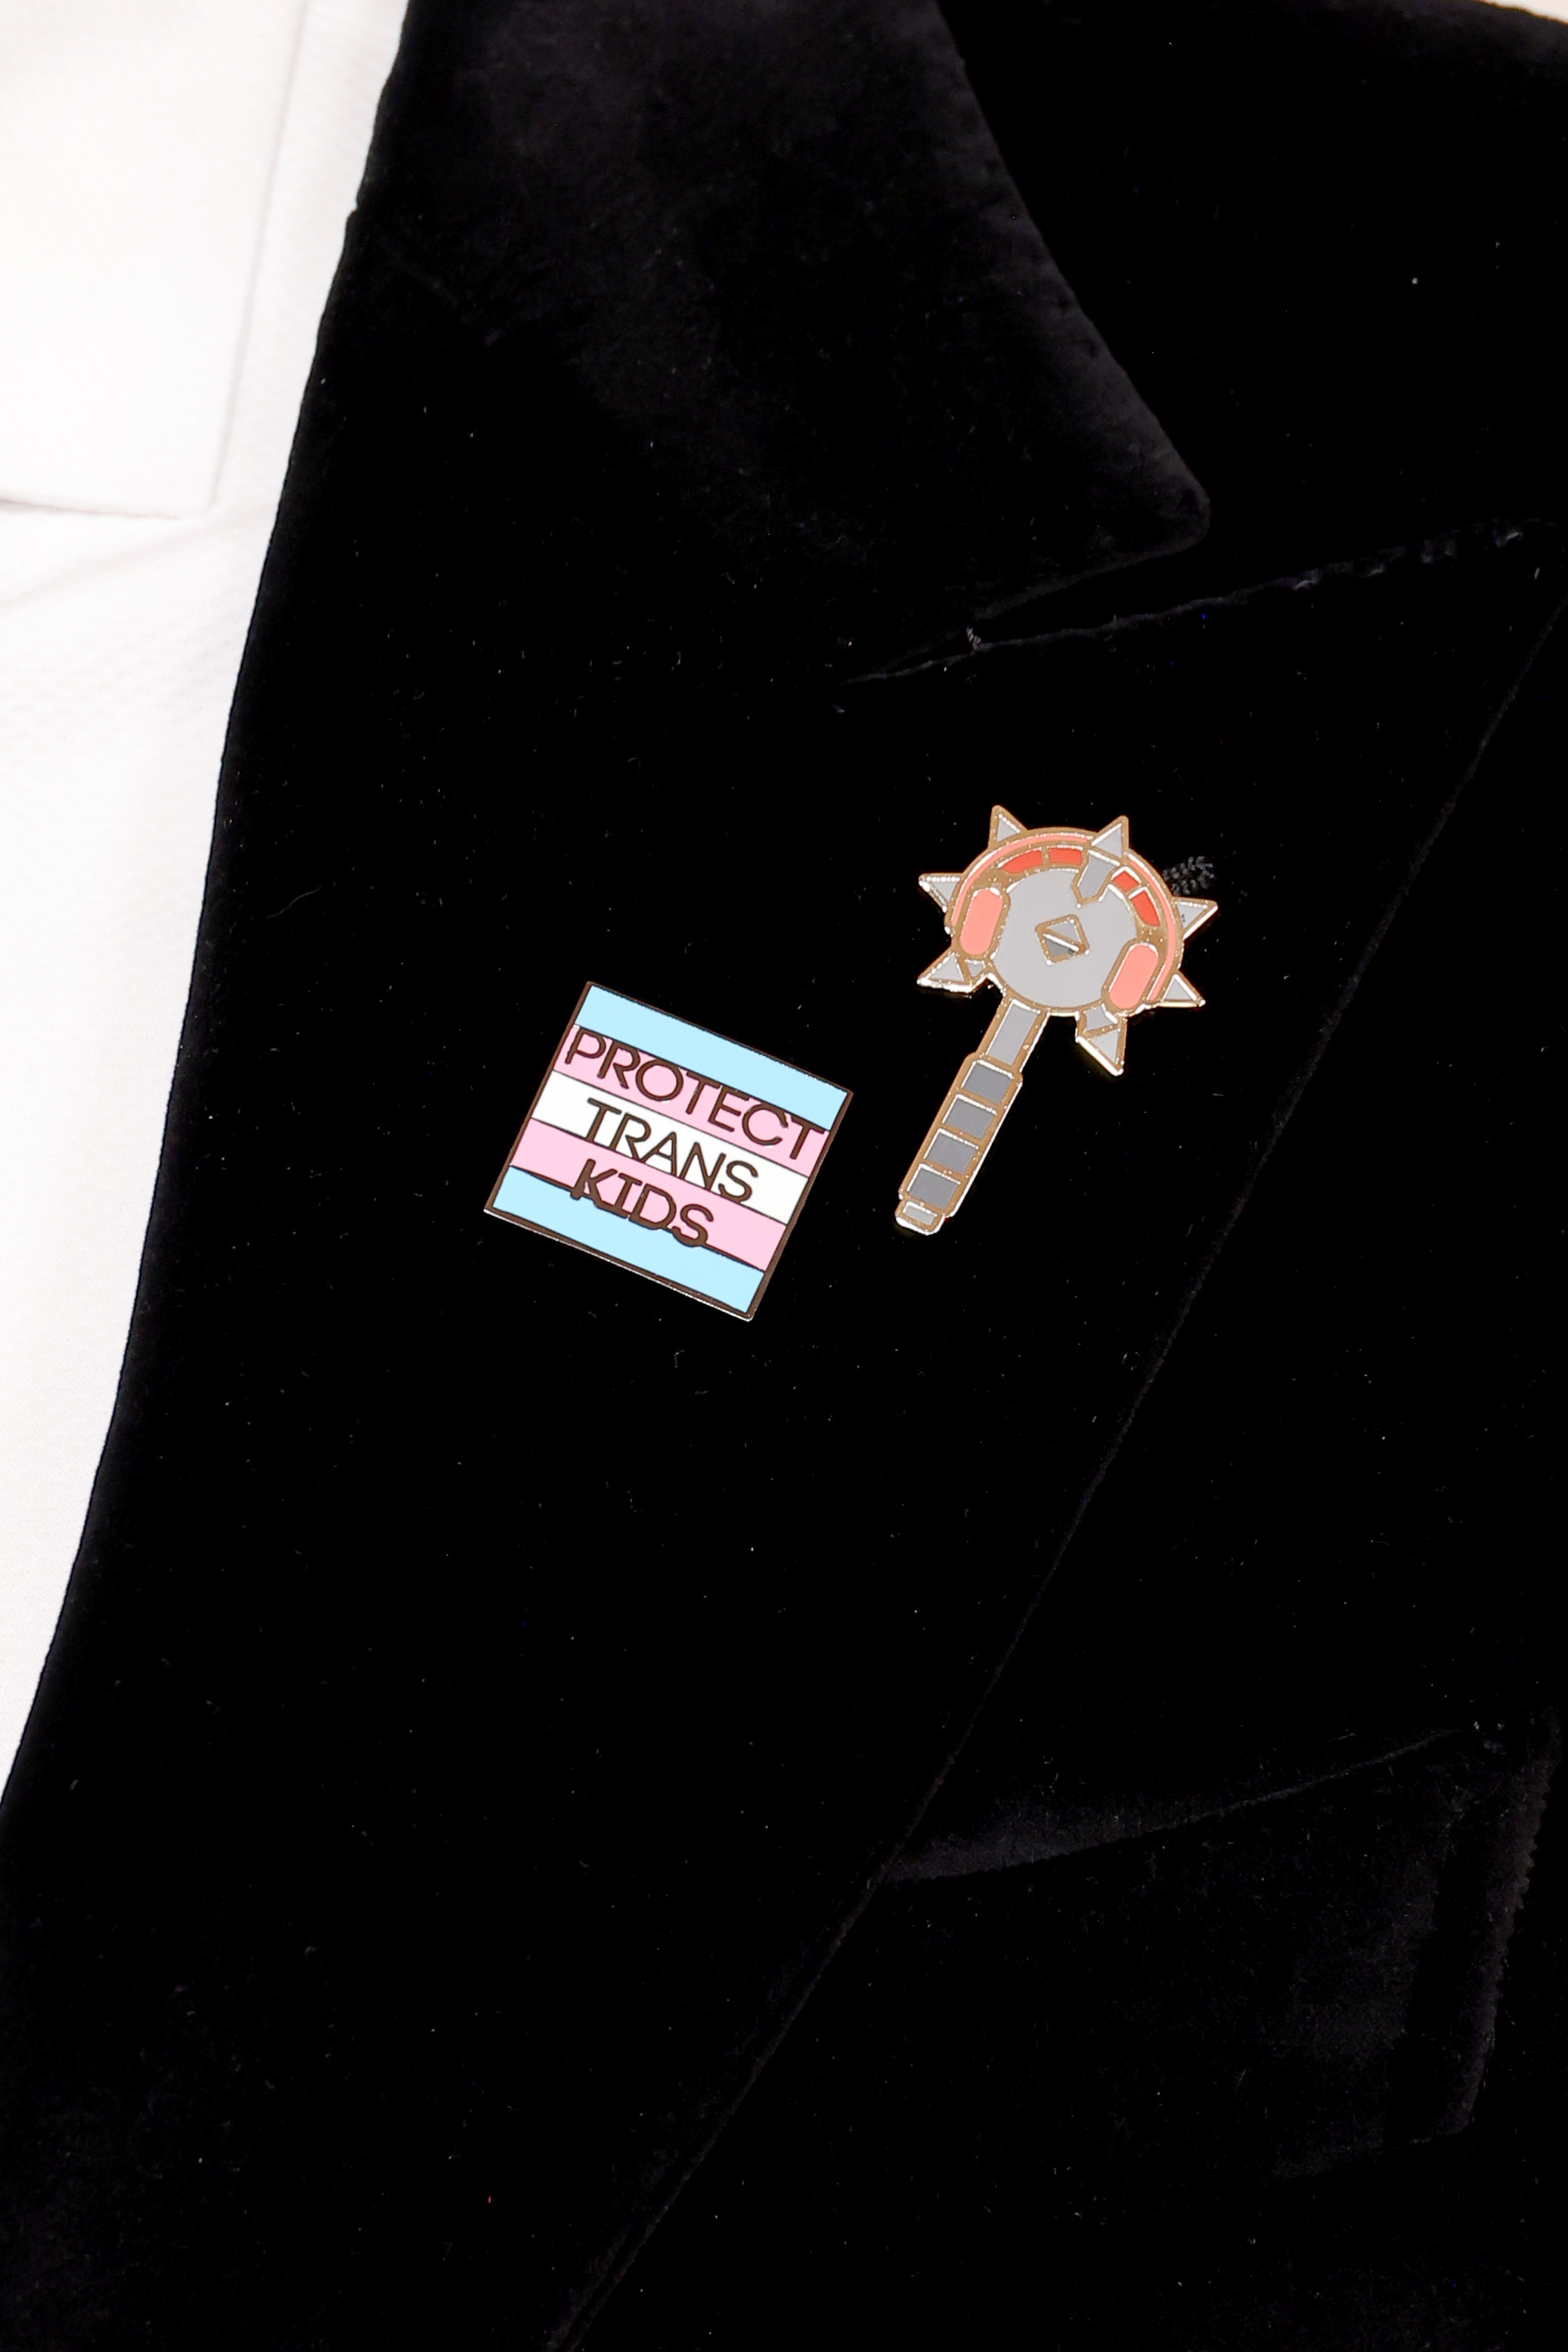 Two lapel pins on a jacket, one with text &quot;PROTECT TRANS KIDS,&quot; and the other shaped like a key